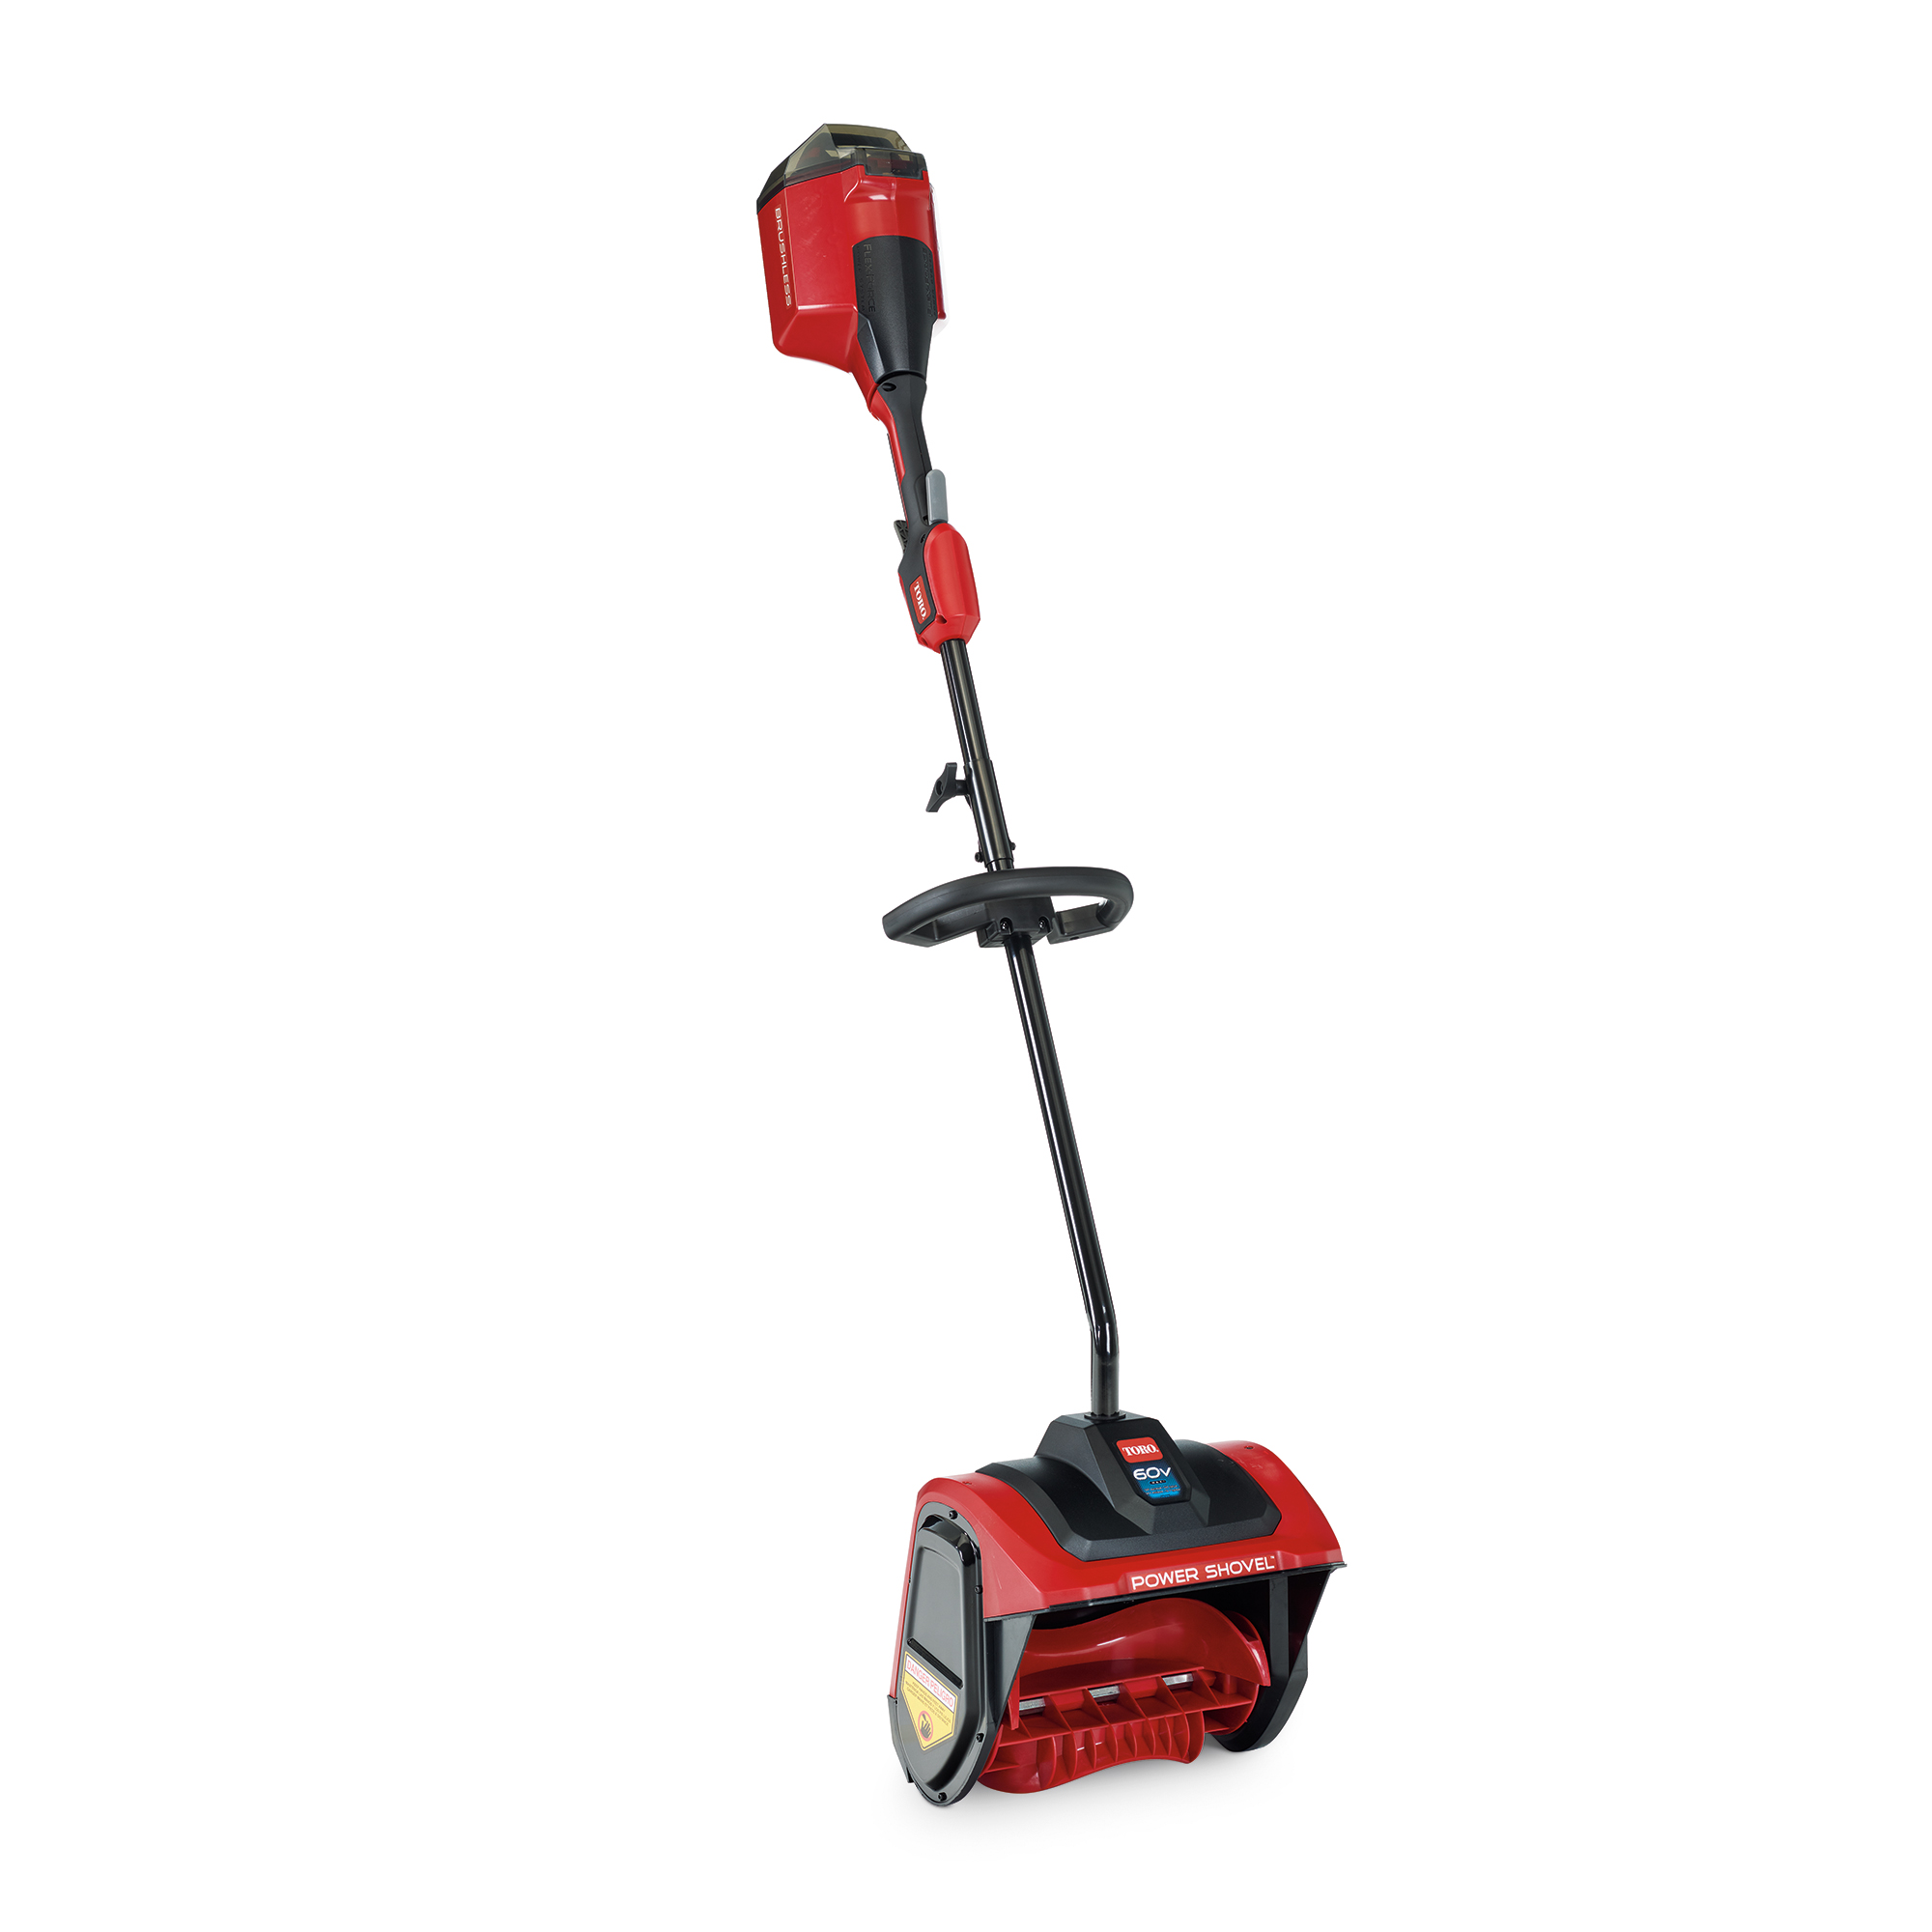 Competitions - Power Tool Competitions - Win Vans & Power Tools